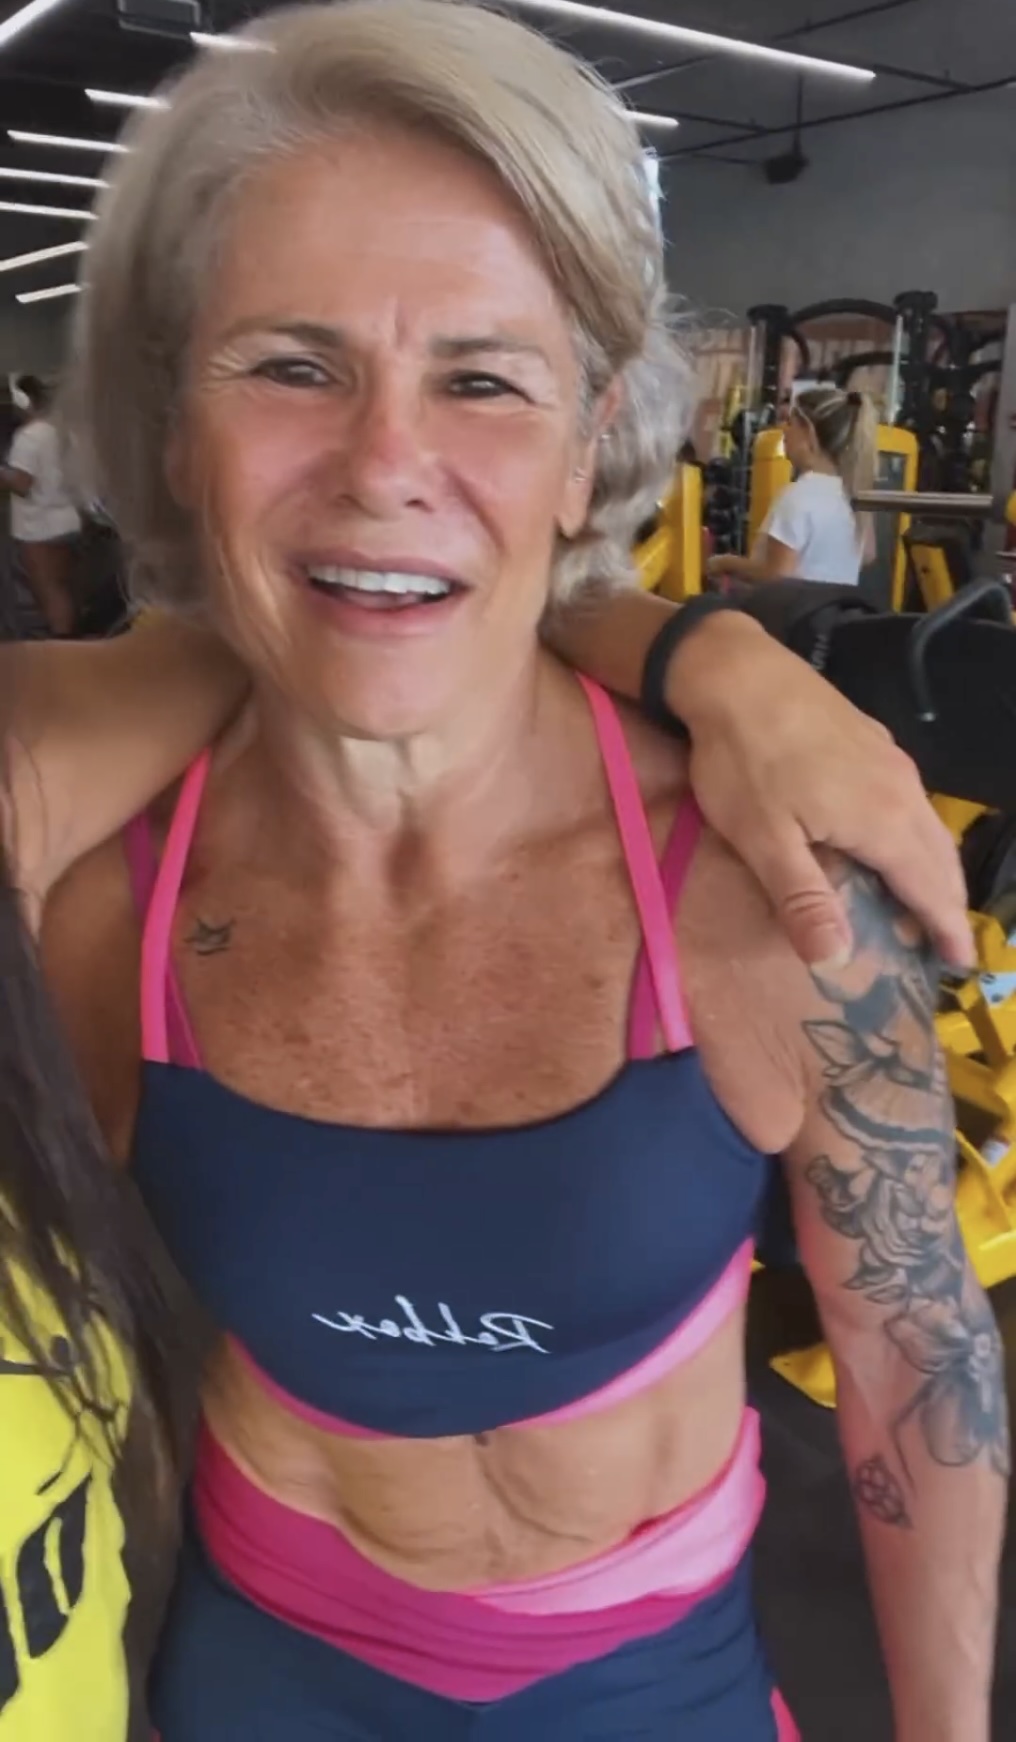 She’s currently aiming to qualify for the CrossFit Games in the women’s 60-64 age division